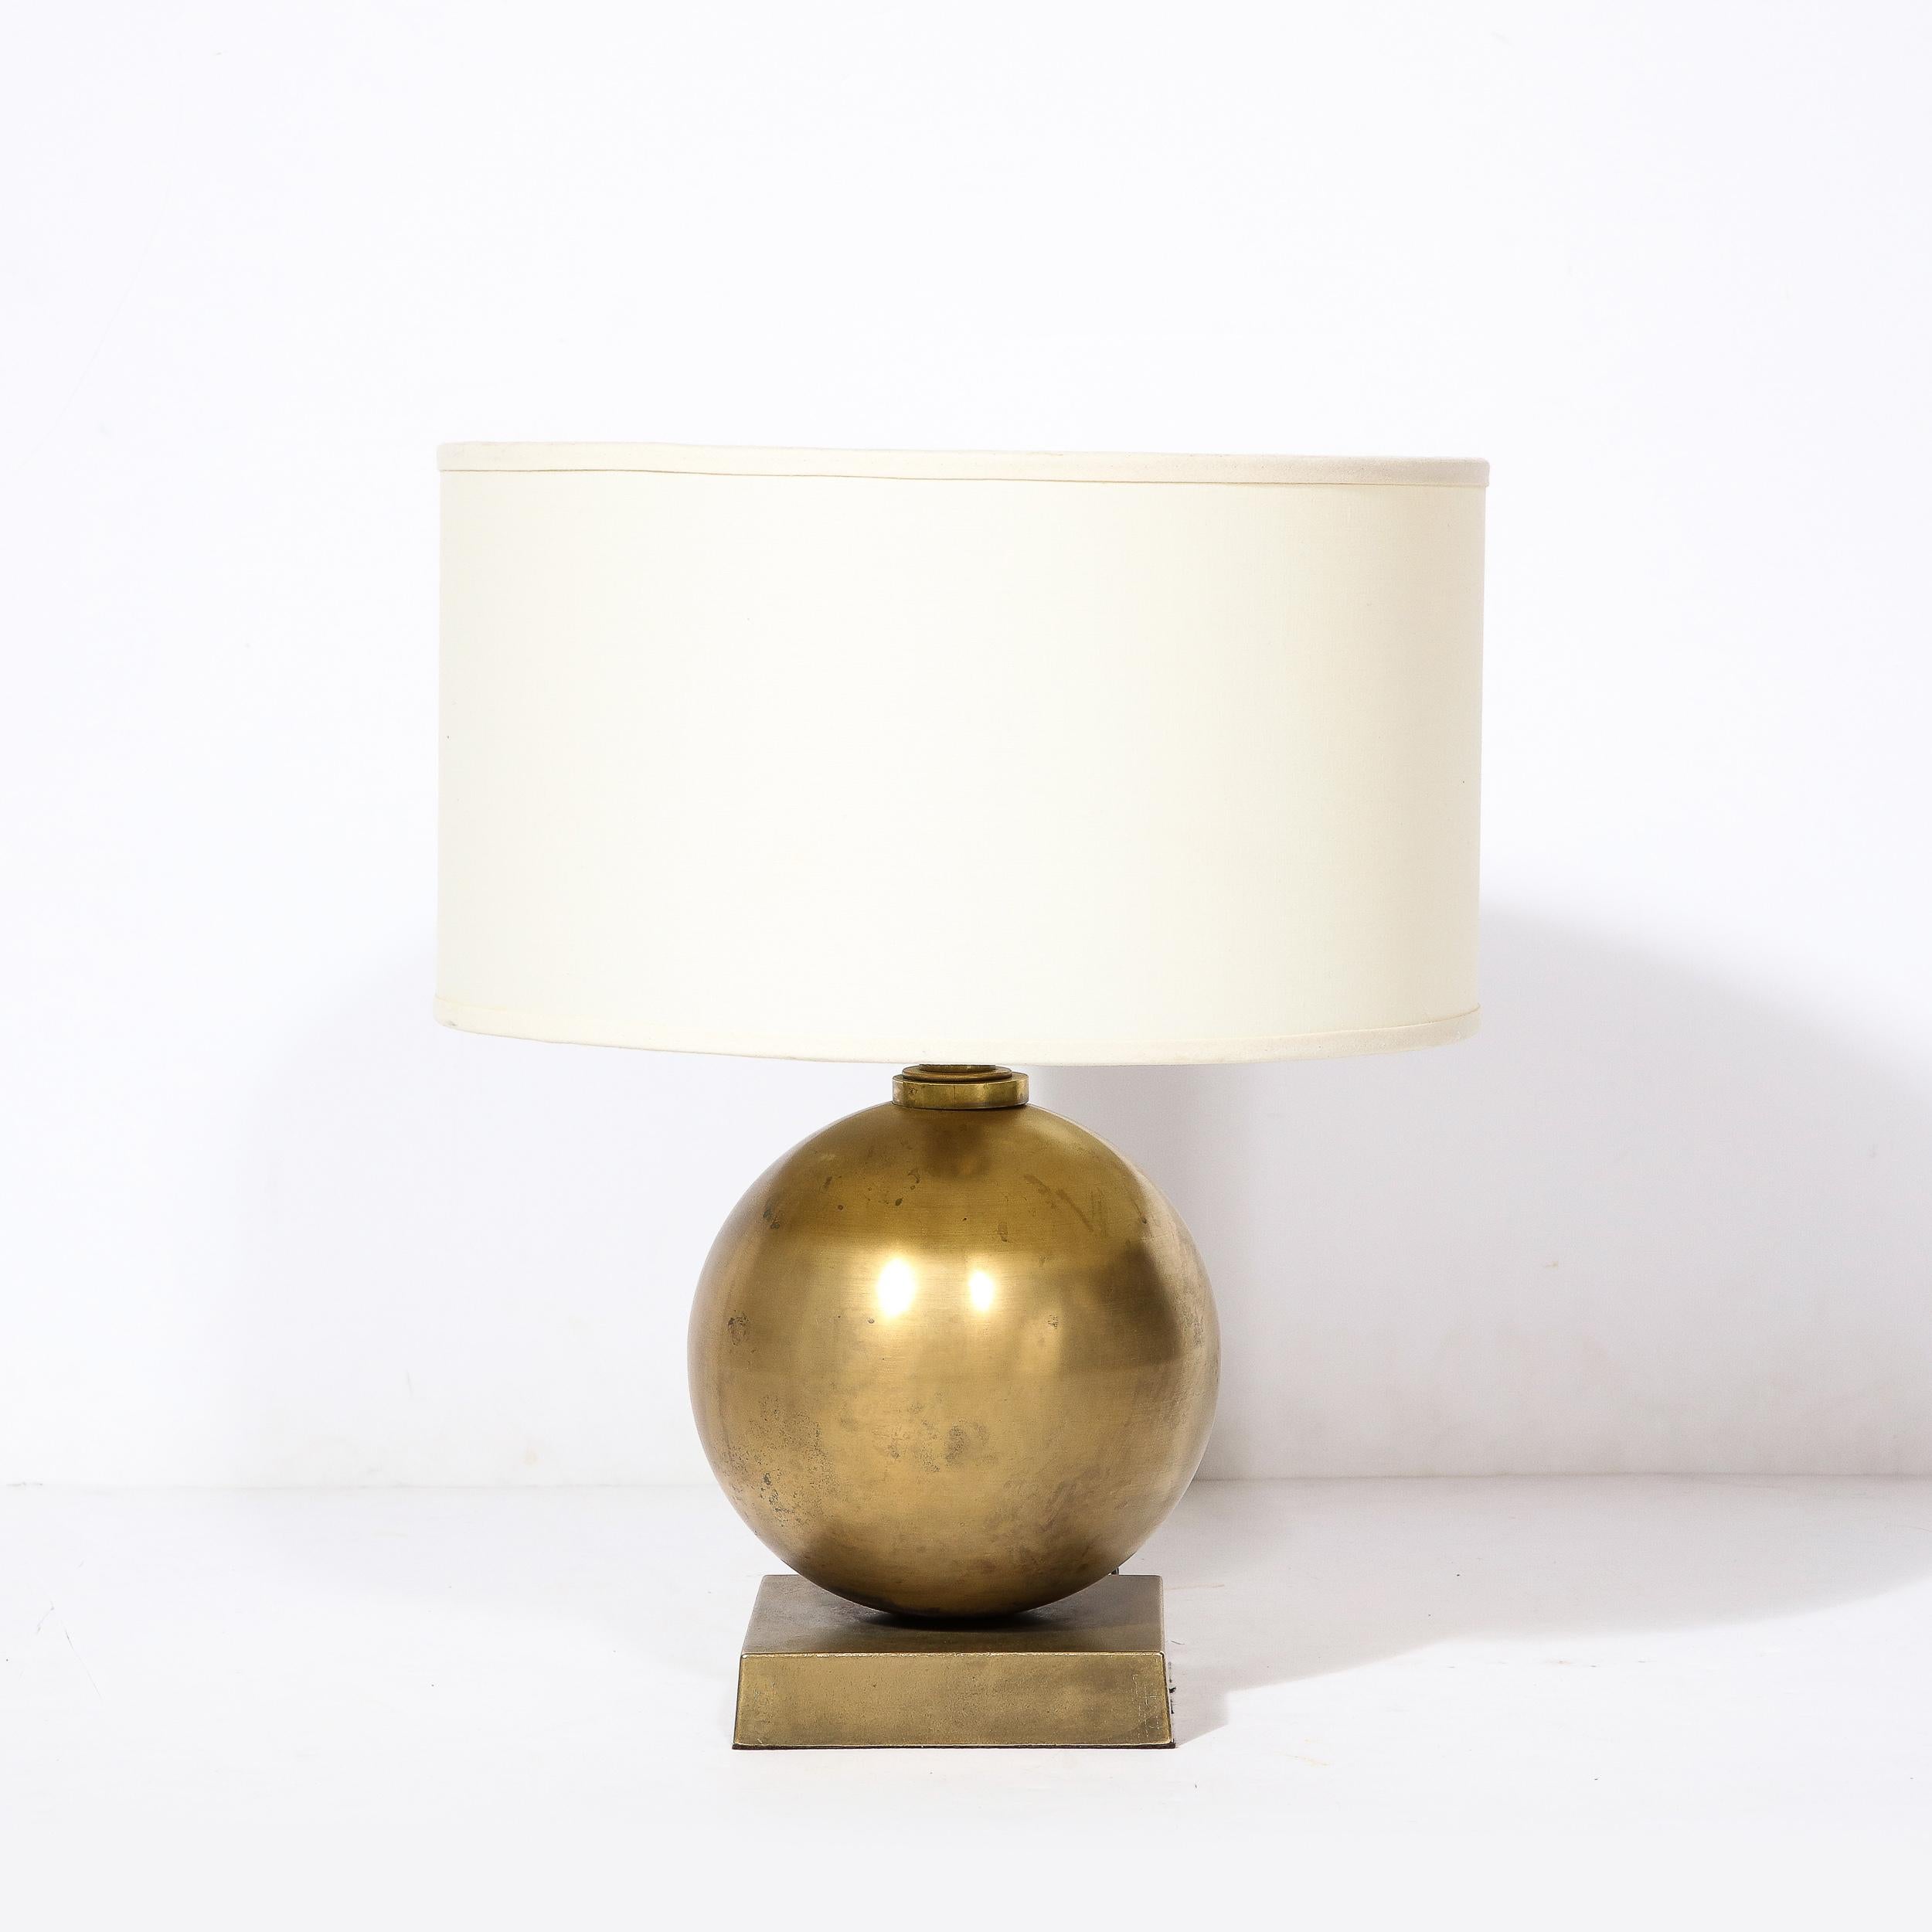 This beautifully minimal Mid-Century Modernist Brass Table Lamp Originates from Italy, Circa 1960. Featuring a beautiful spherical brass body and rectilinear base, the design utilizes minimalist geometric forms to achieve a stunning balance and